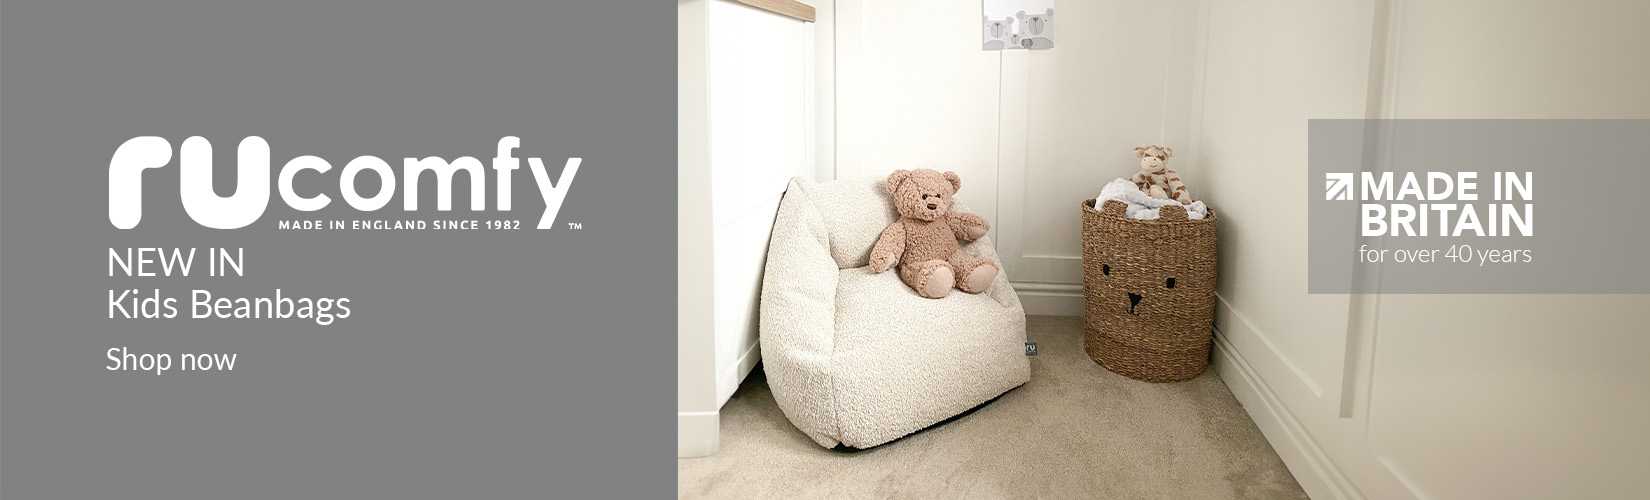 Rucomfy. New in kids beanbags. Made in Britain. Shop now. 